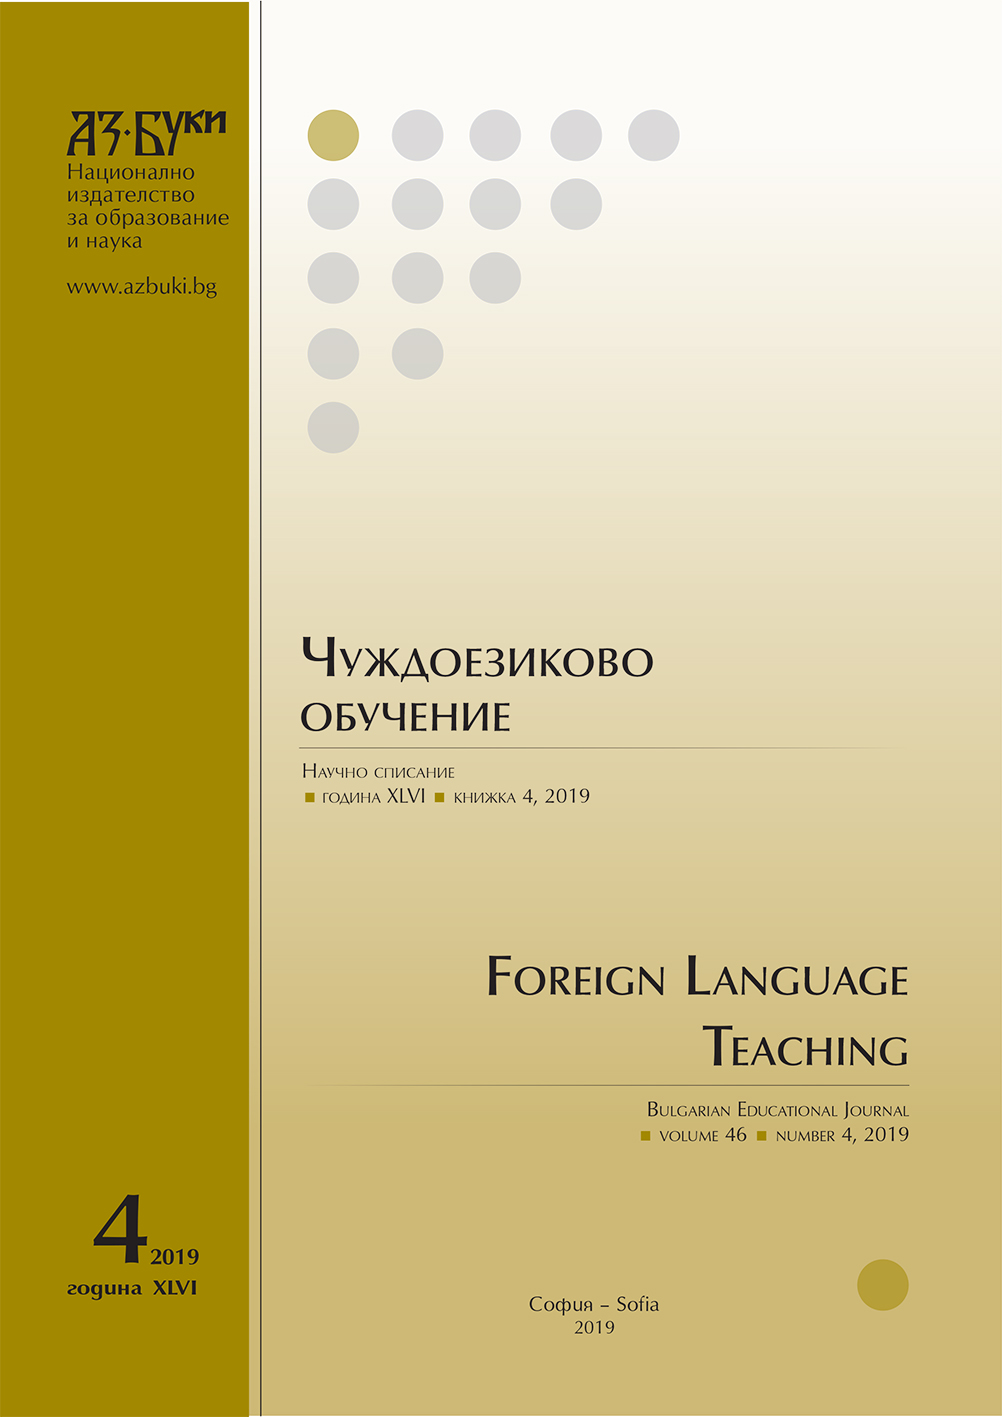 About Song in Russian as a Foreign Language Lesson Cover Image